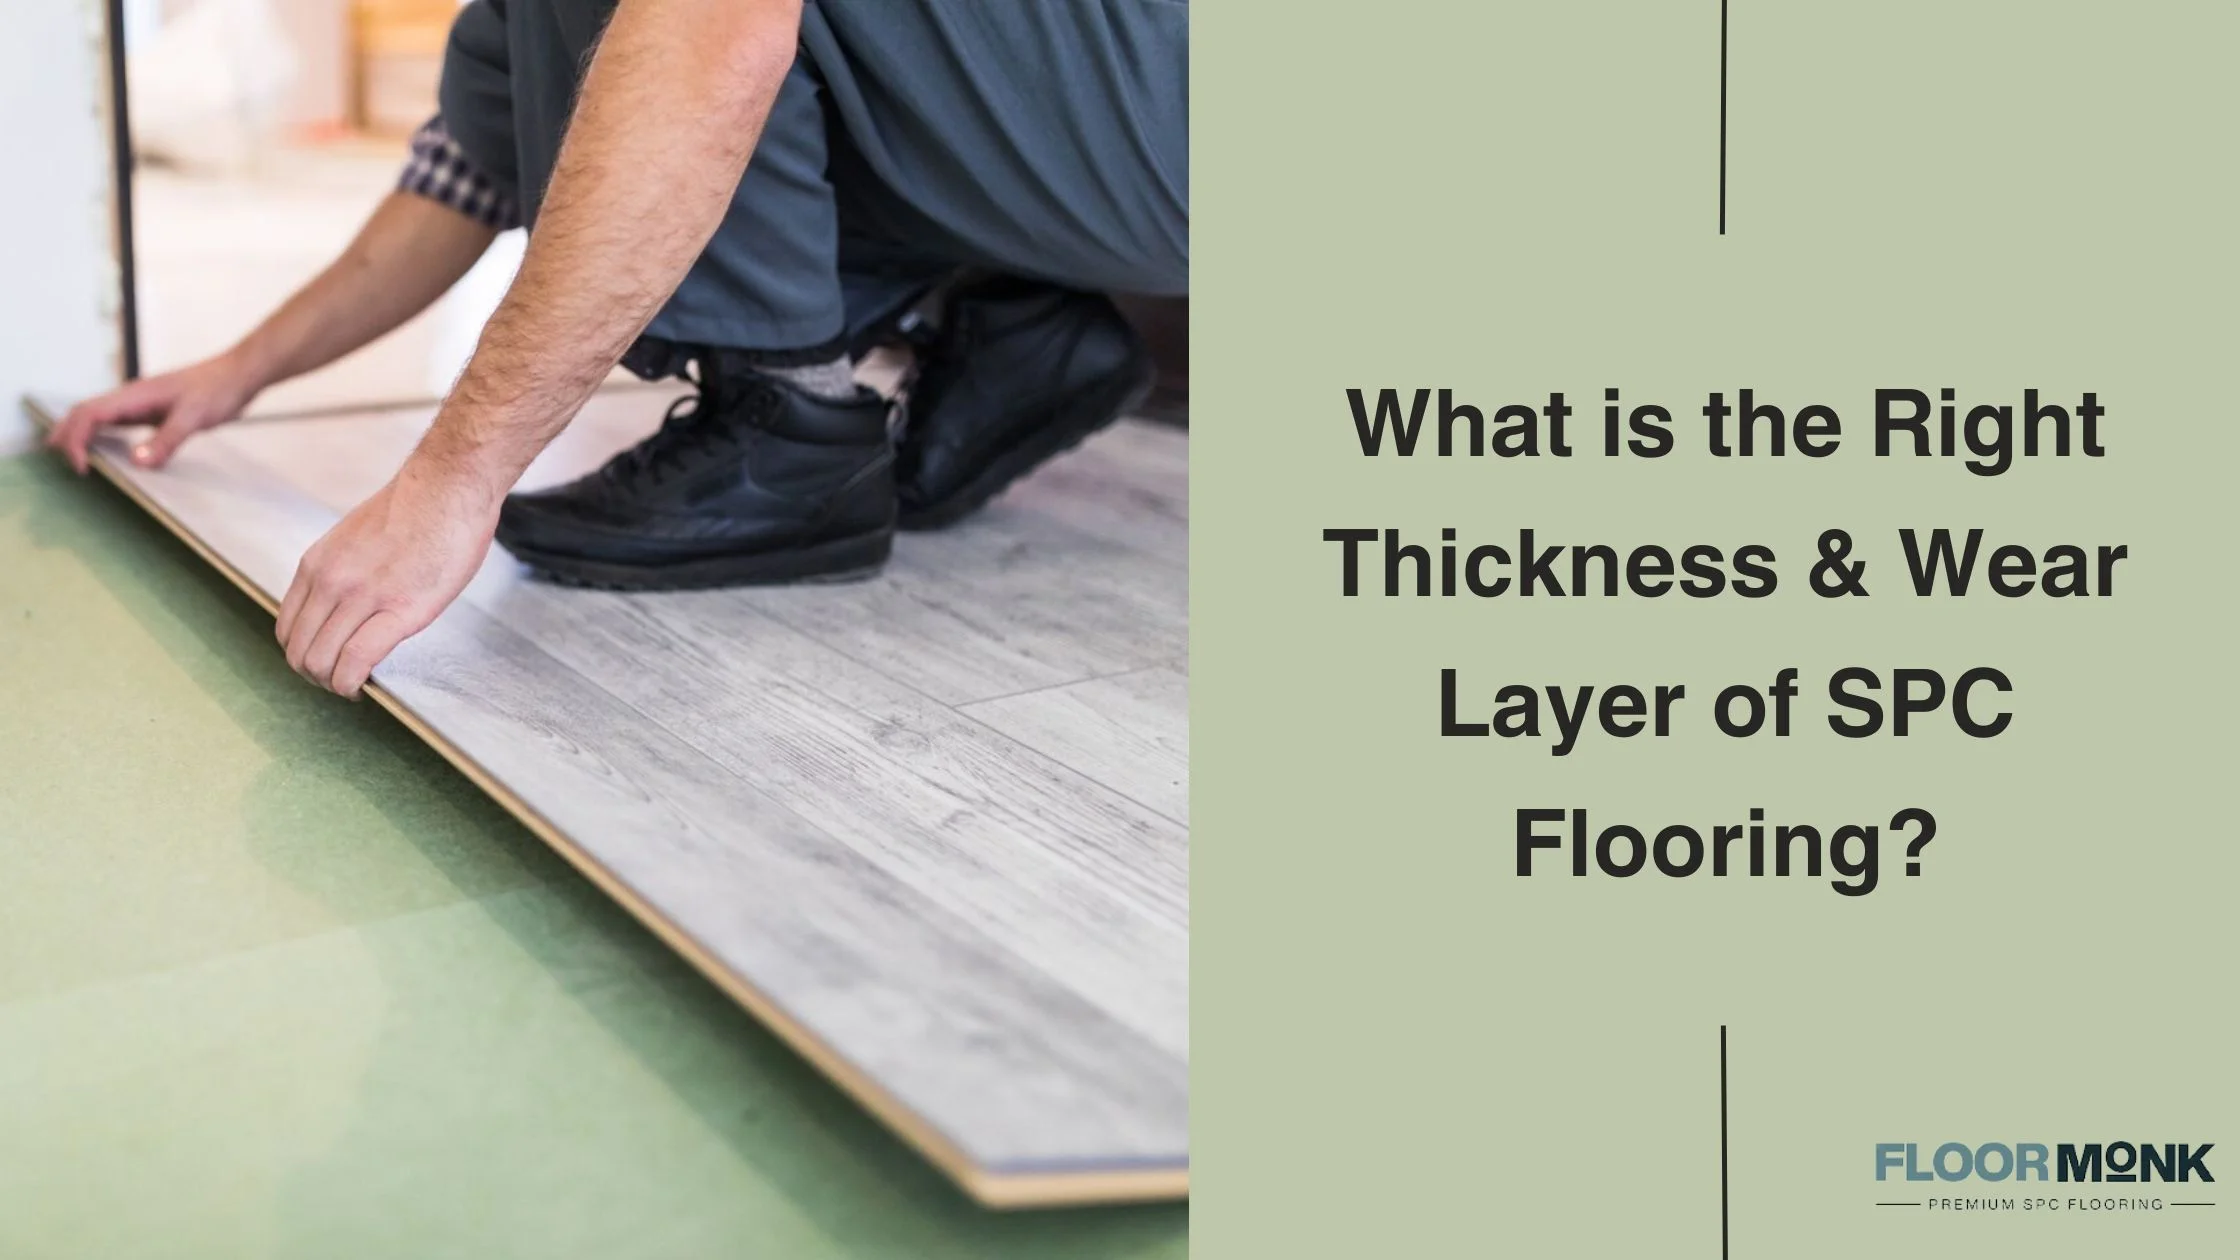 What Is The Right Thickness & Wear Layer Of SPC Flooring?